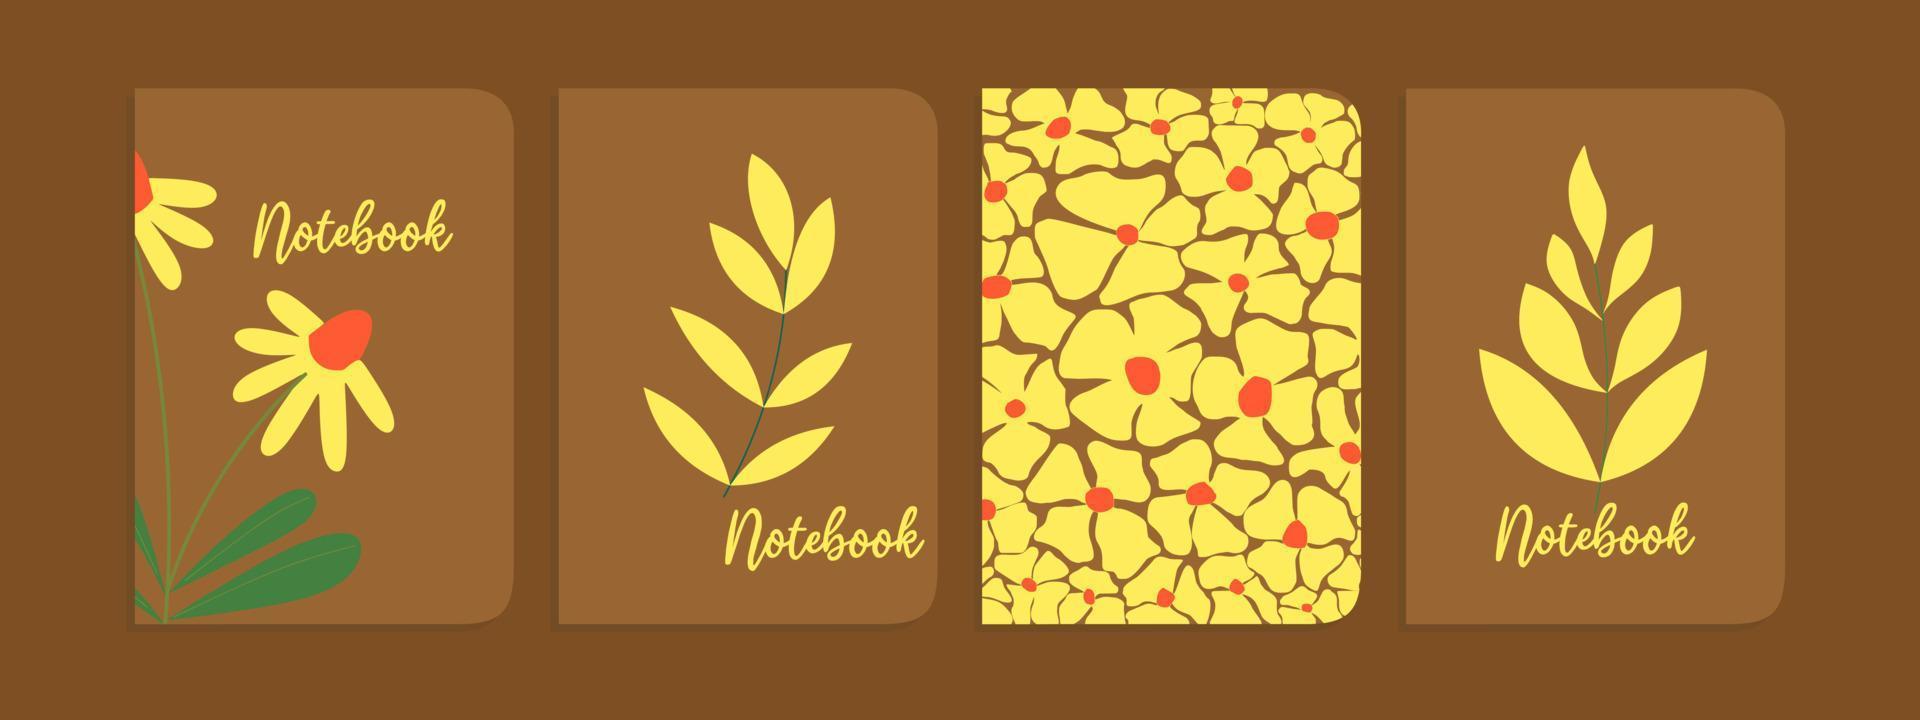 set of notebook templates with hand drawn floral patterns. beautiful design for notebooks, planners, brochures, books, catalogs vector